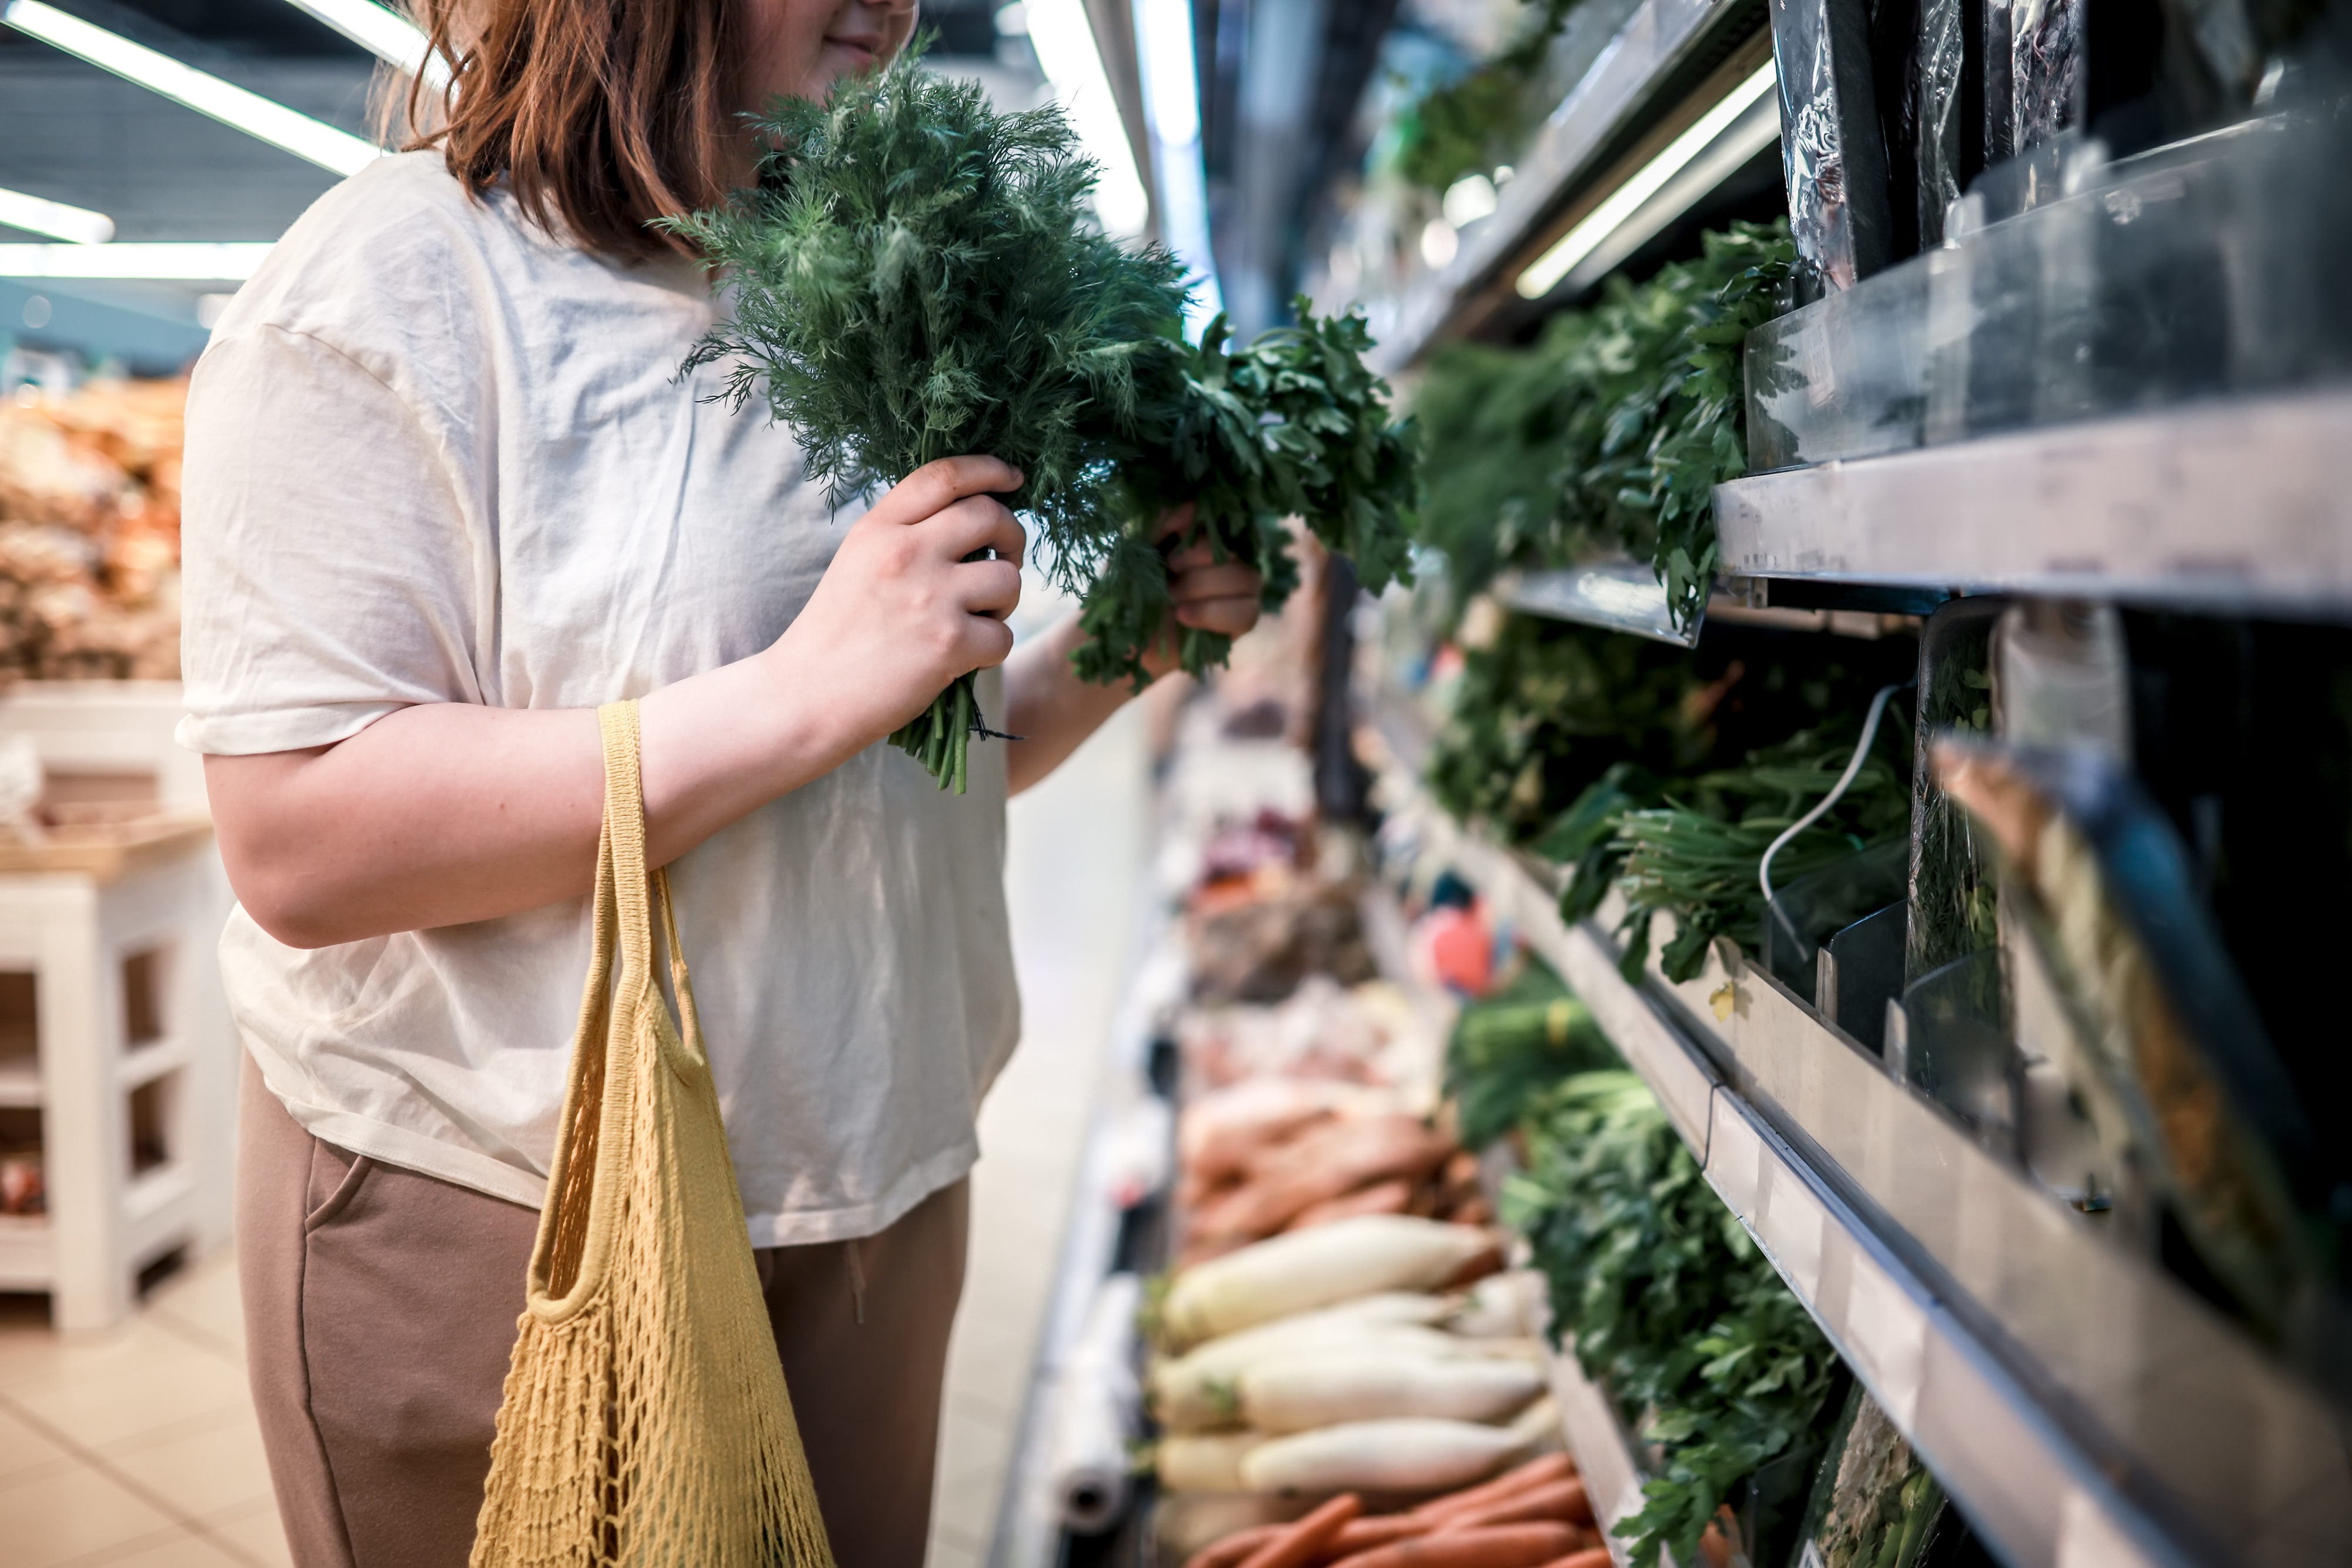 Person shopping for vegetables in a grocery store, holding dill and a reusable bag